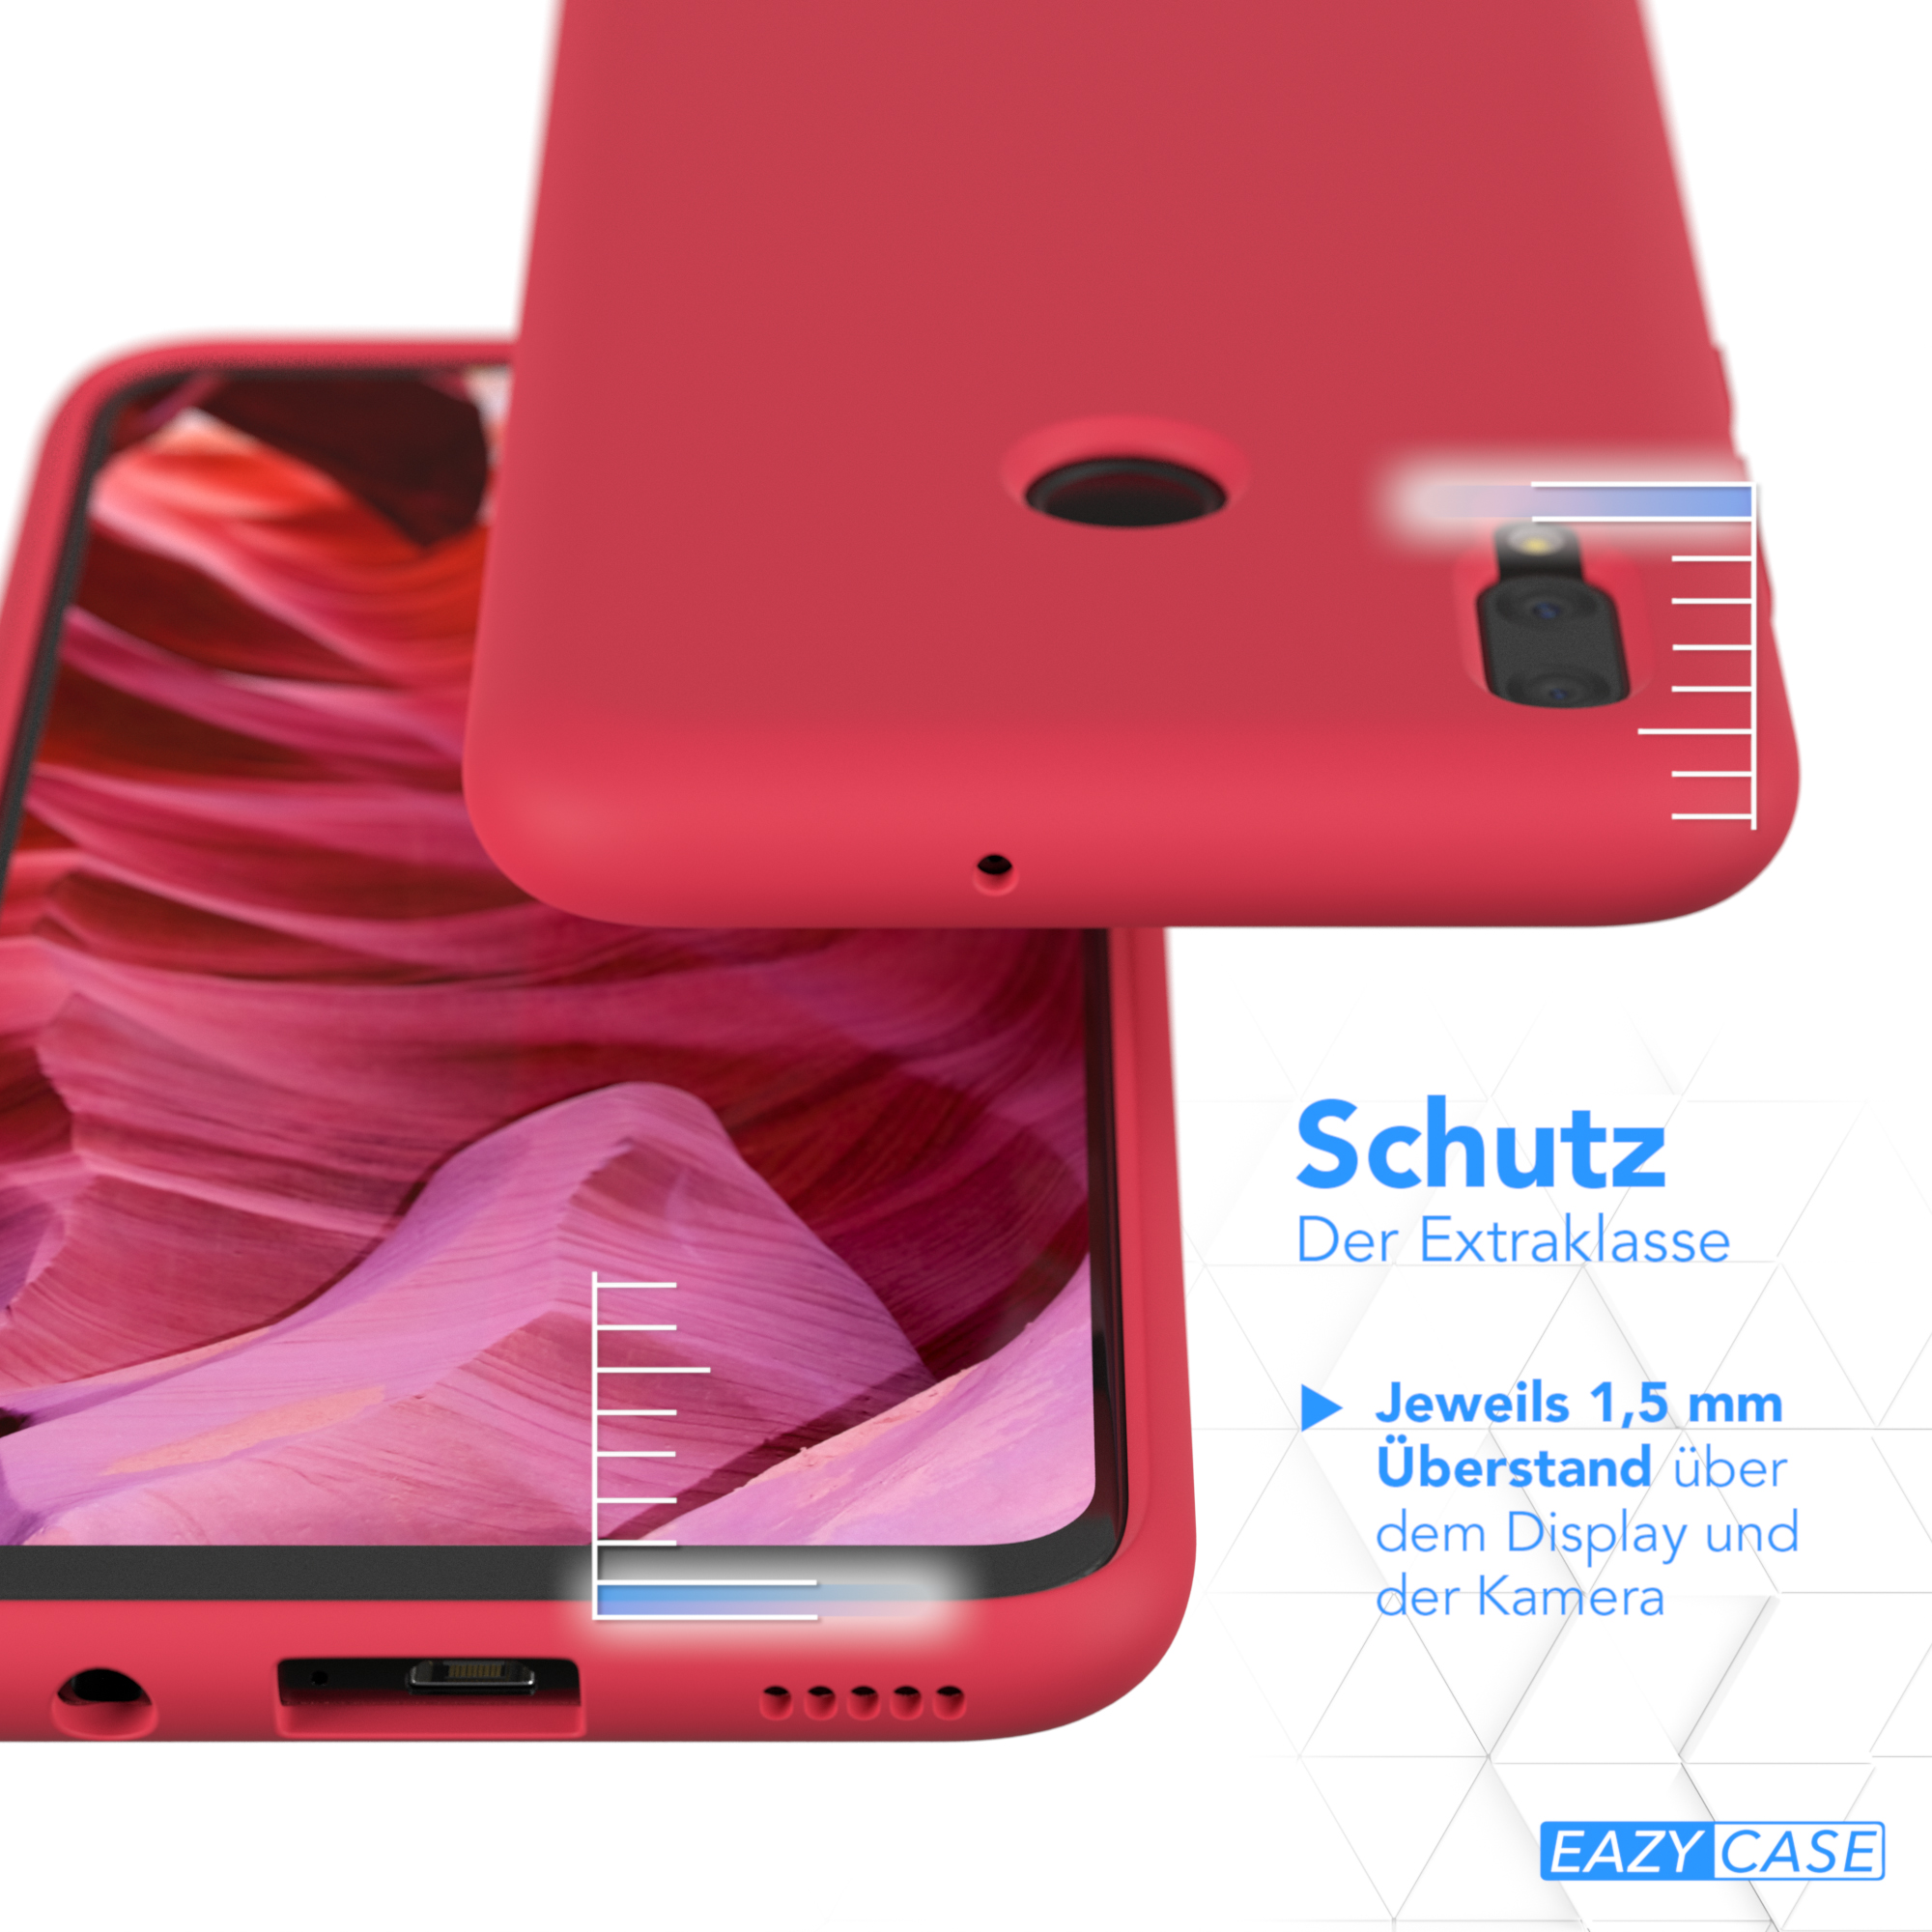 EAZY CASE Premium Silikon Handycase, / Huawei, Backcover, Rot Smart (2019), Beere P